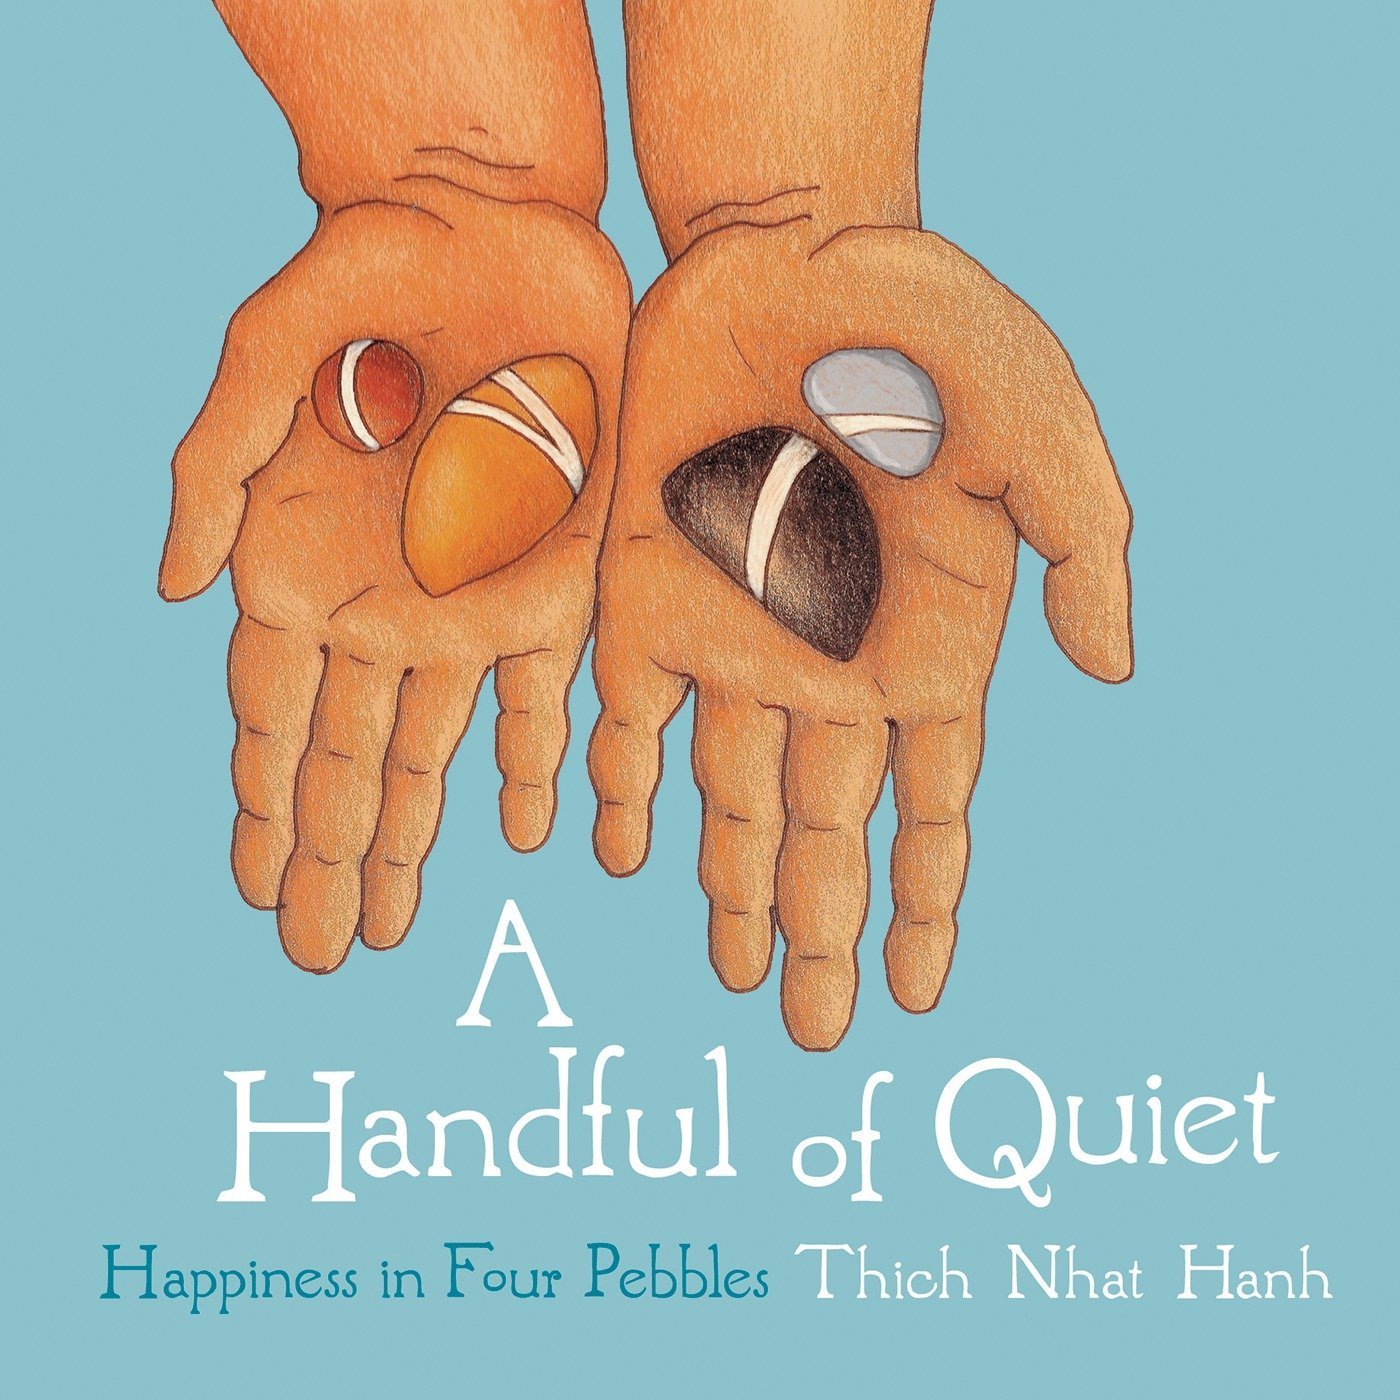 a handful of quiet mindfulness book